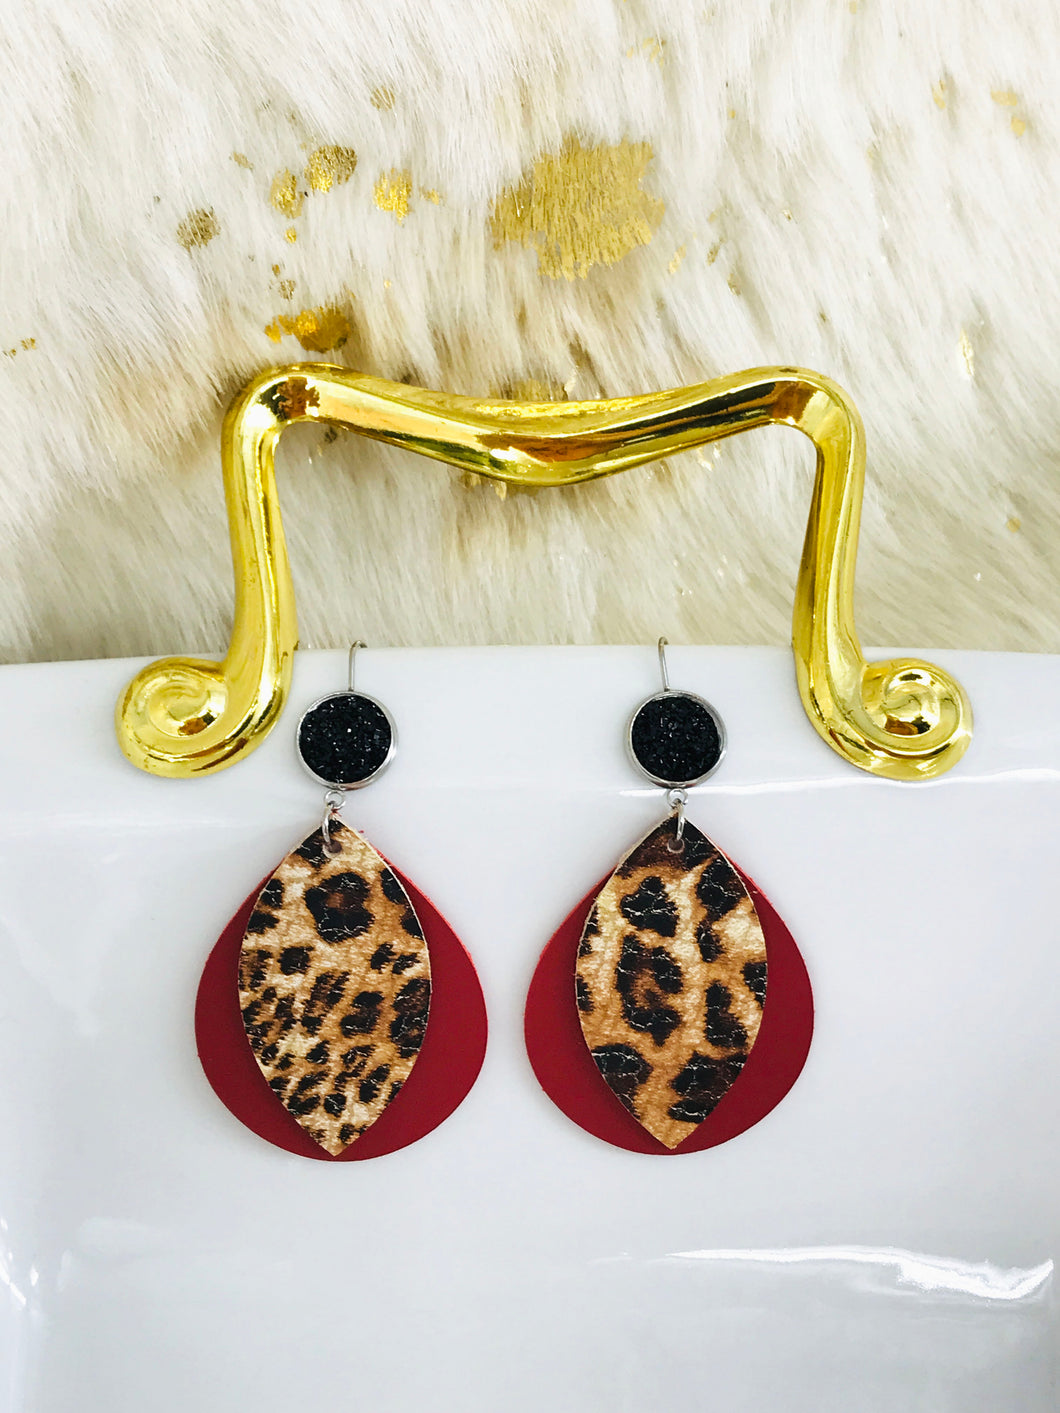 Black Druzy Agate and Cranberry and Leopard Leather Earrings - E19-2910